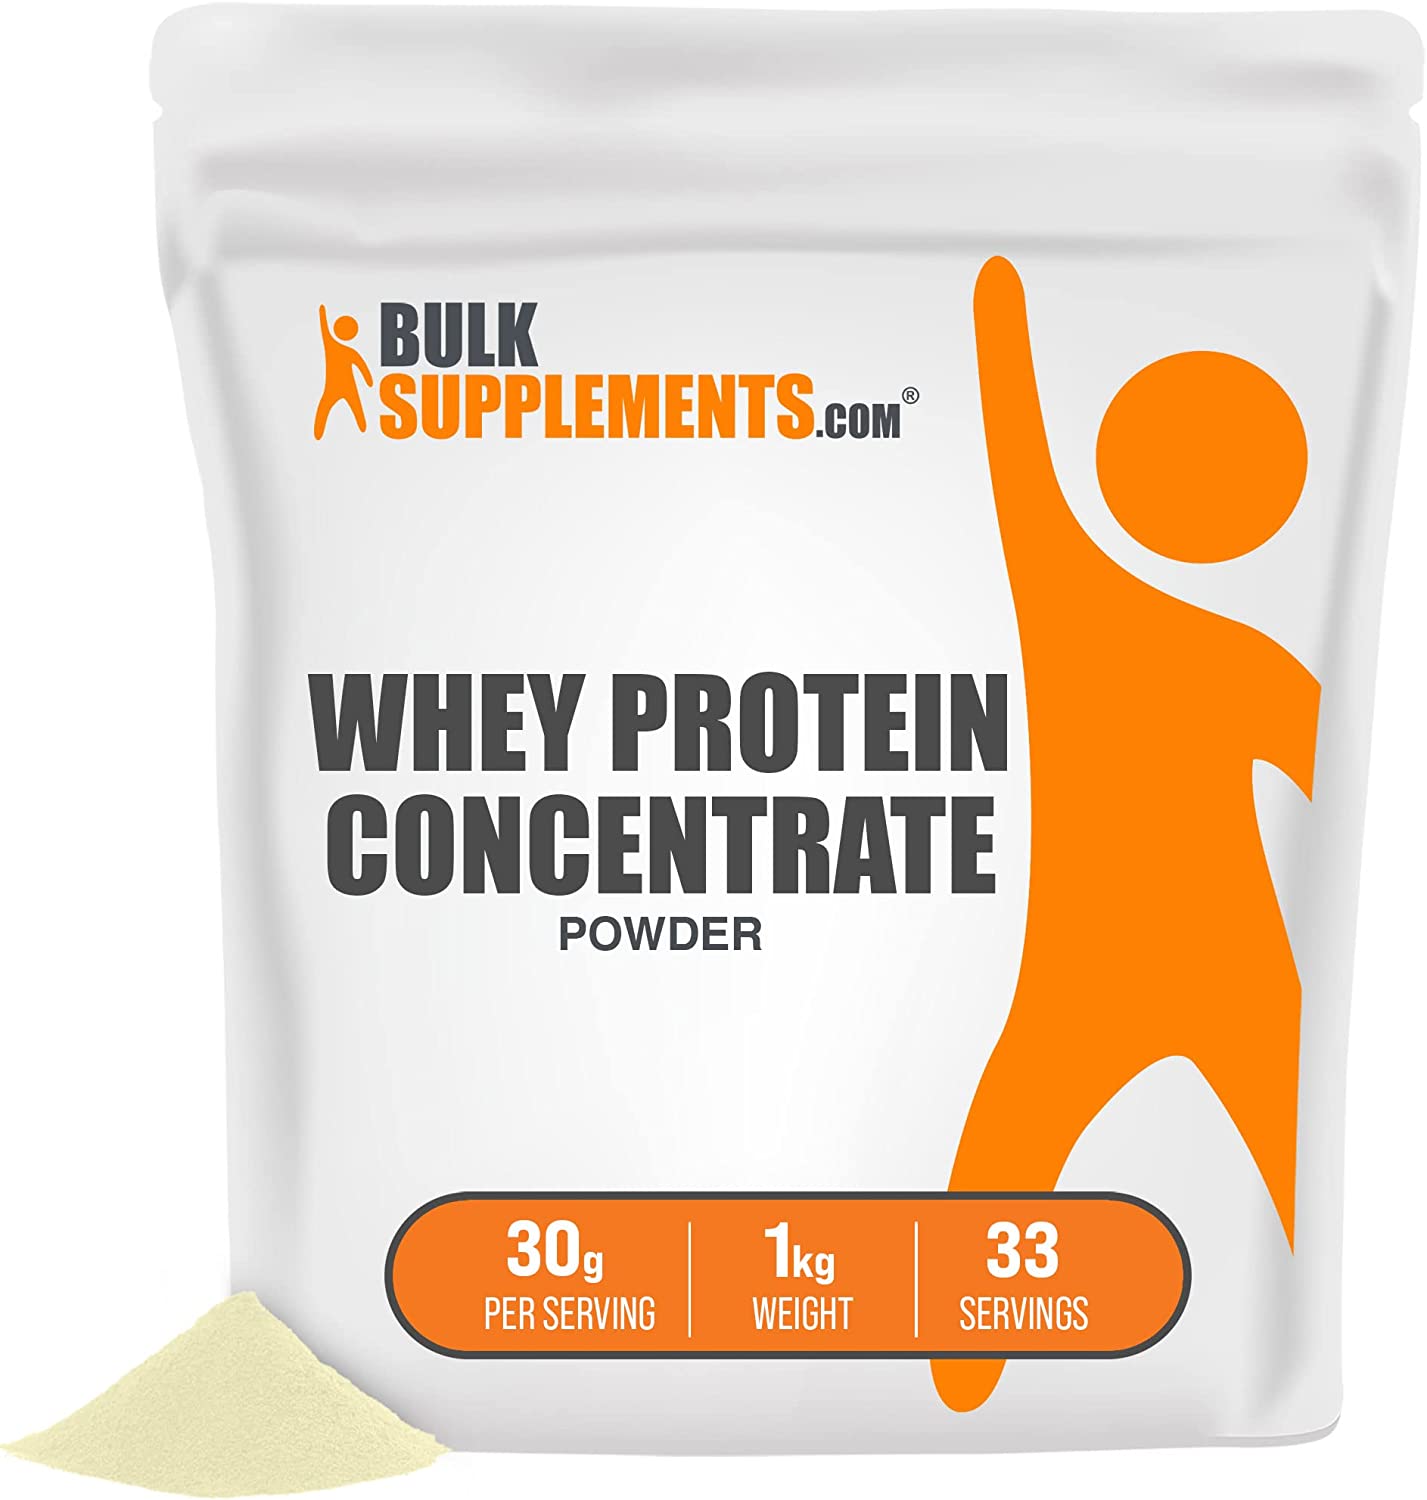 BULKSUPPLEMENTS.COM Gluten-Free Low-Carb Whey Protein Concentrate